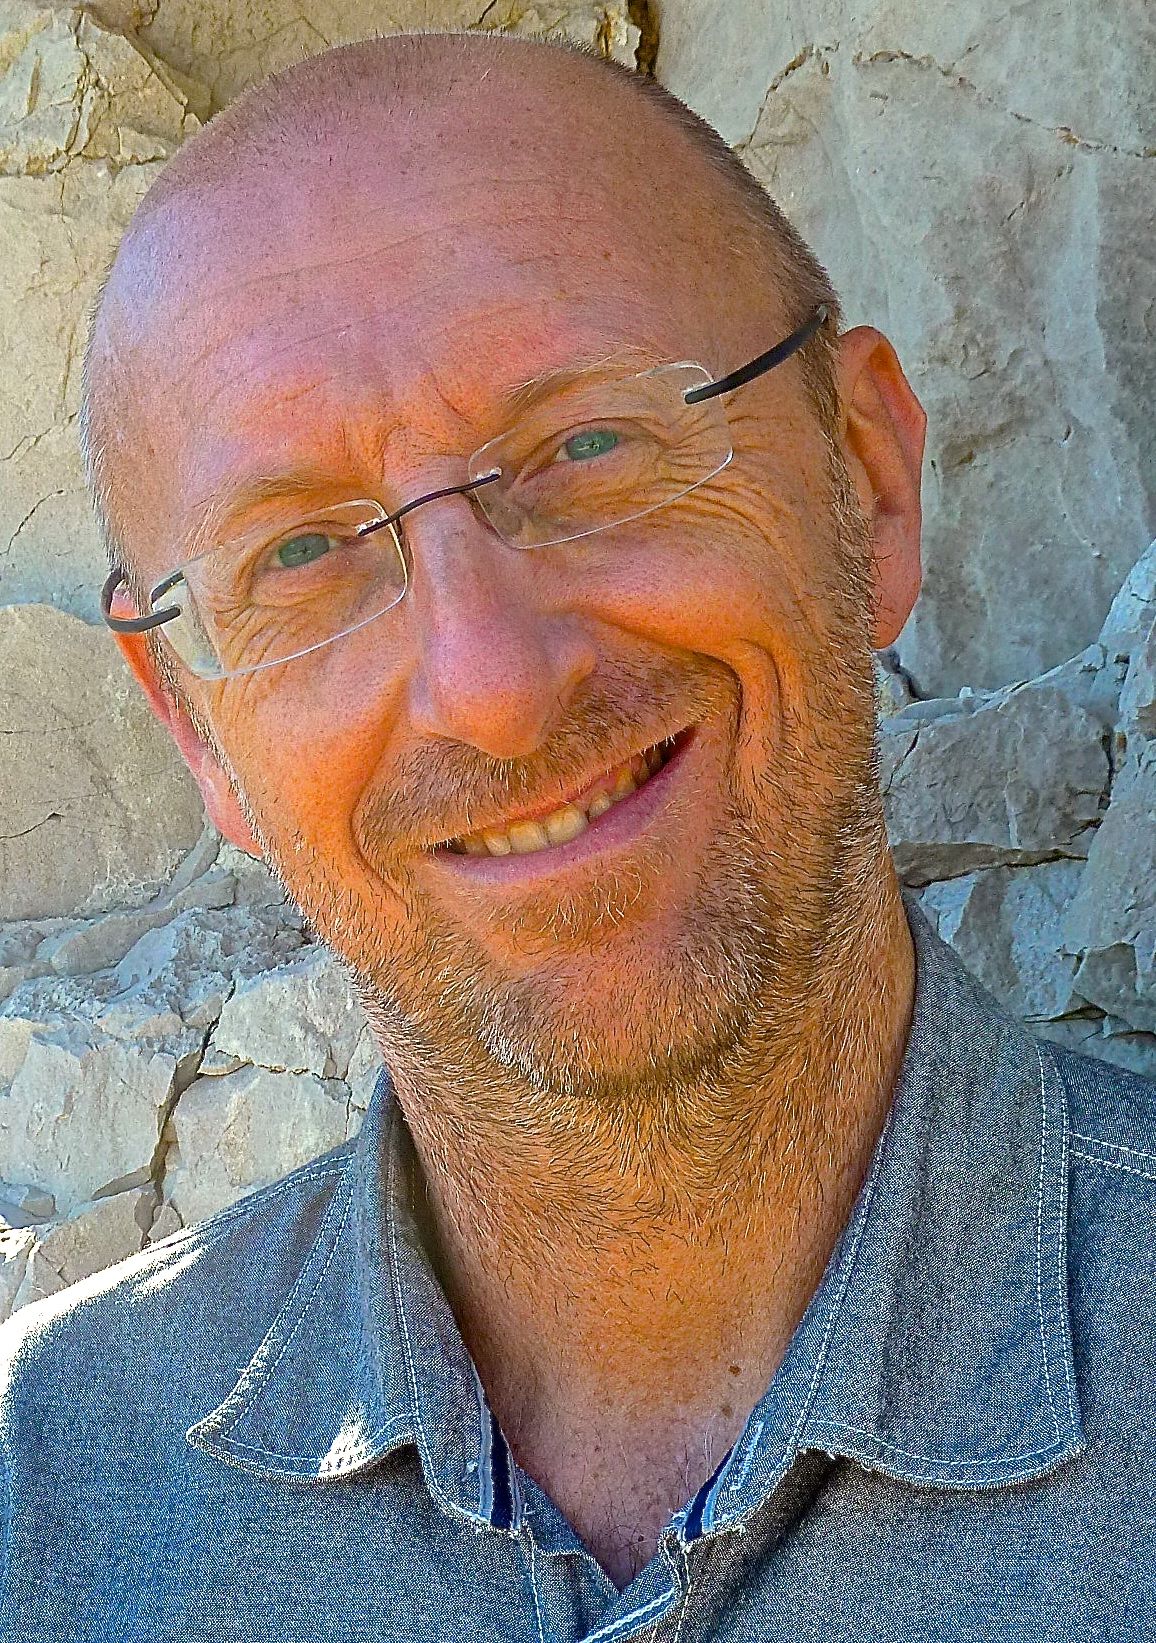 Paolo Rosso